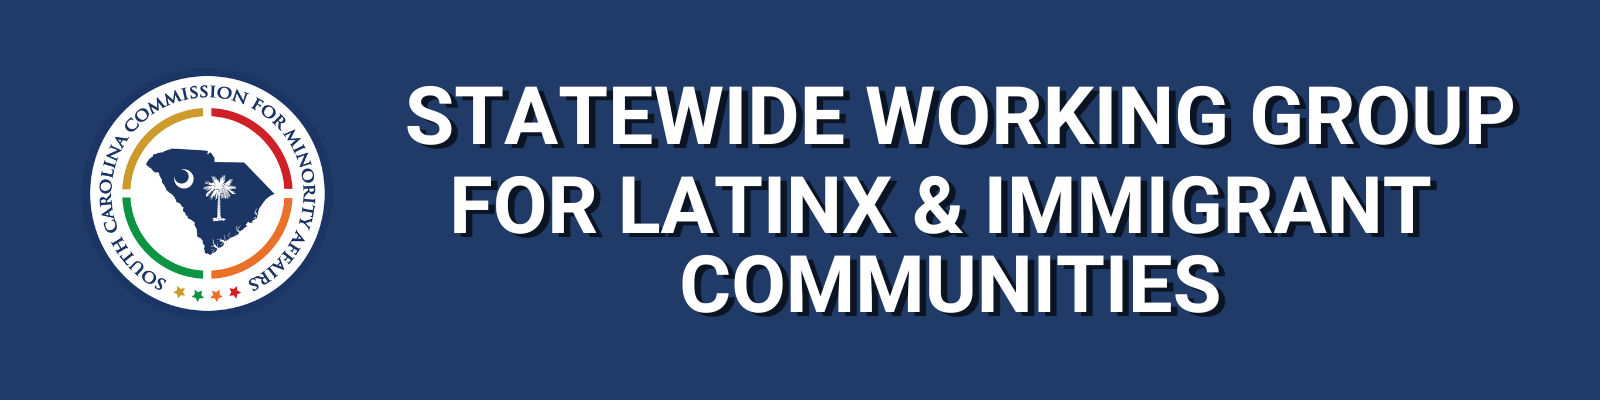 Photo of a blue banner saying "statewide working group for latinx and immigrant communities"